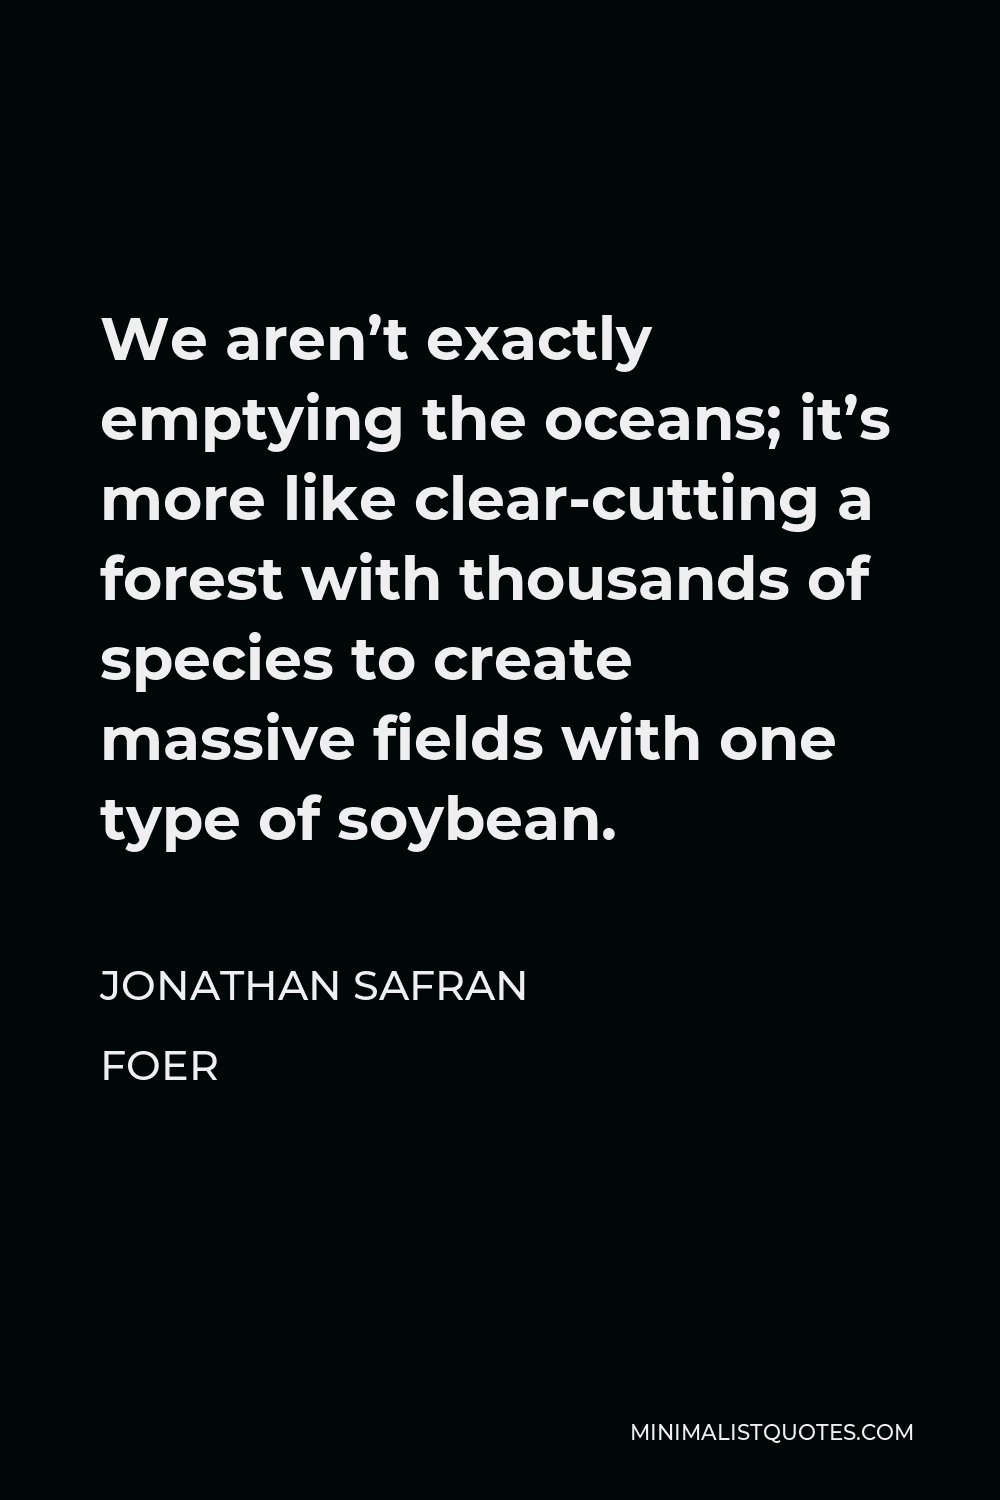 Jonathan Safran Foer Quote - We aren’t exactly emptying the oceans; it’s more like clear-cutting a forest with thousands of species to create massive fields with one type of soybean.